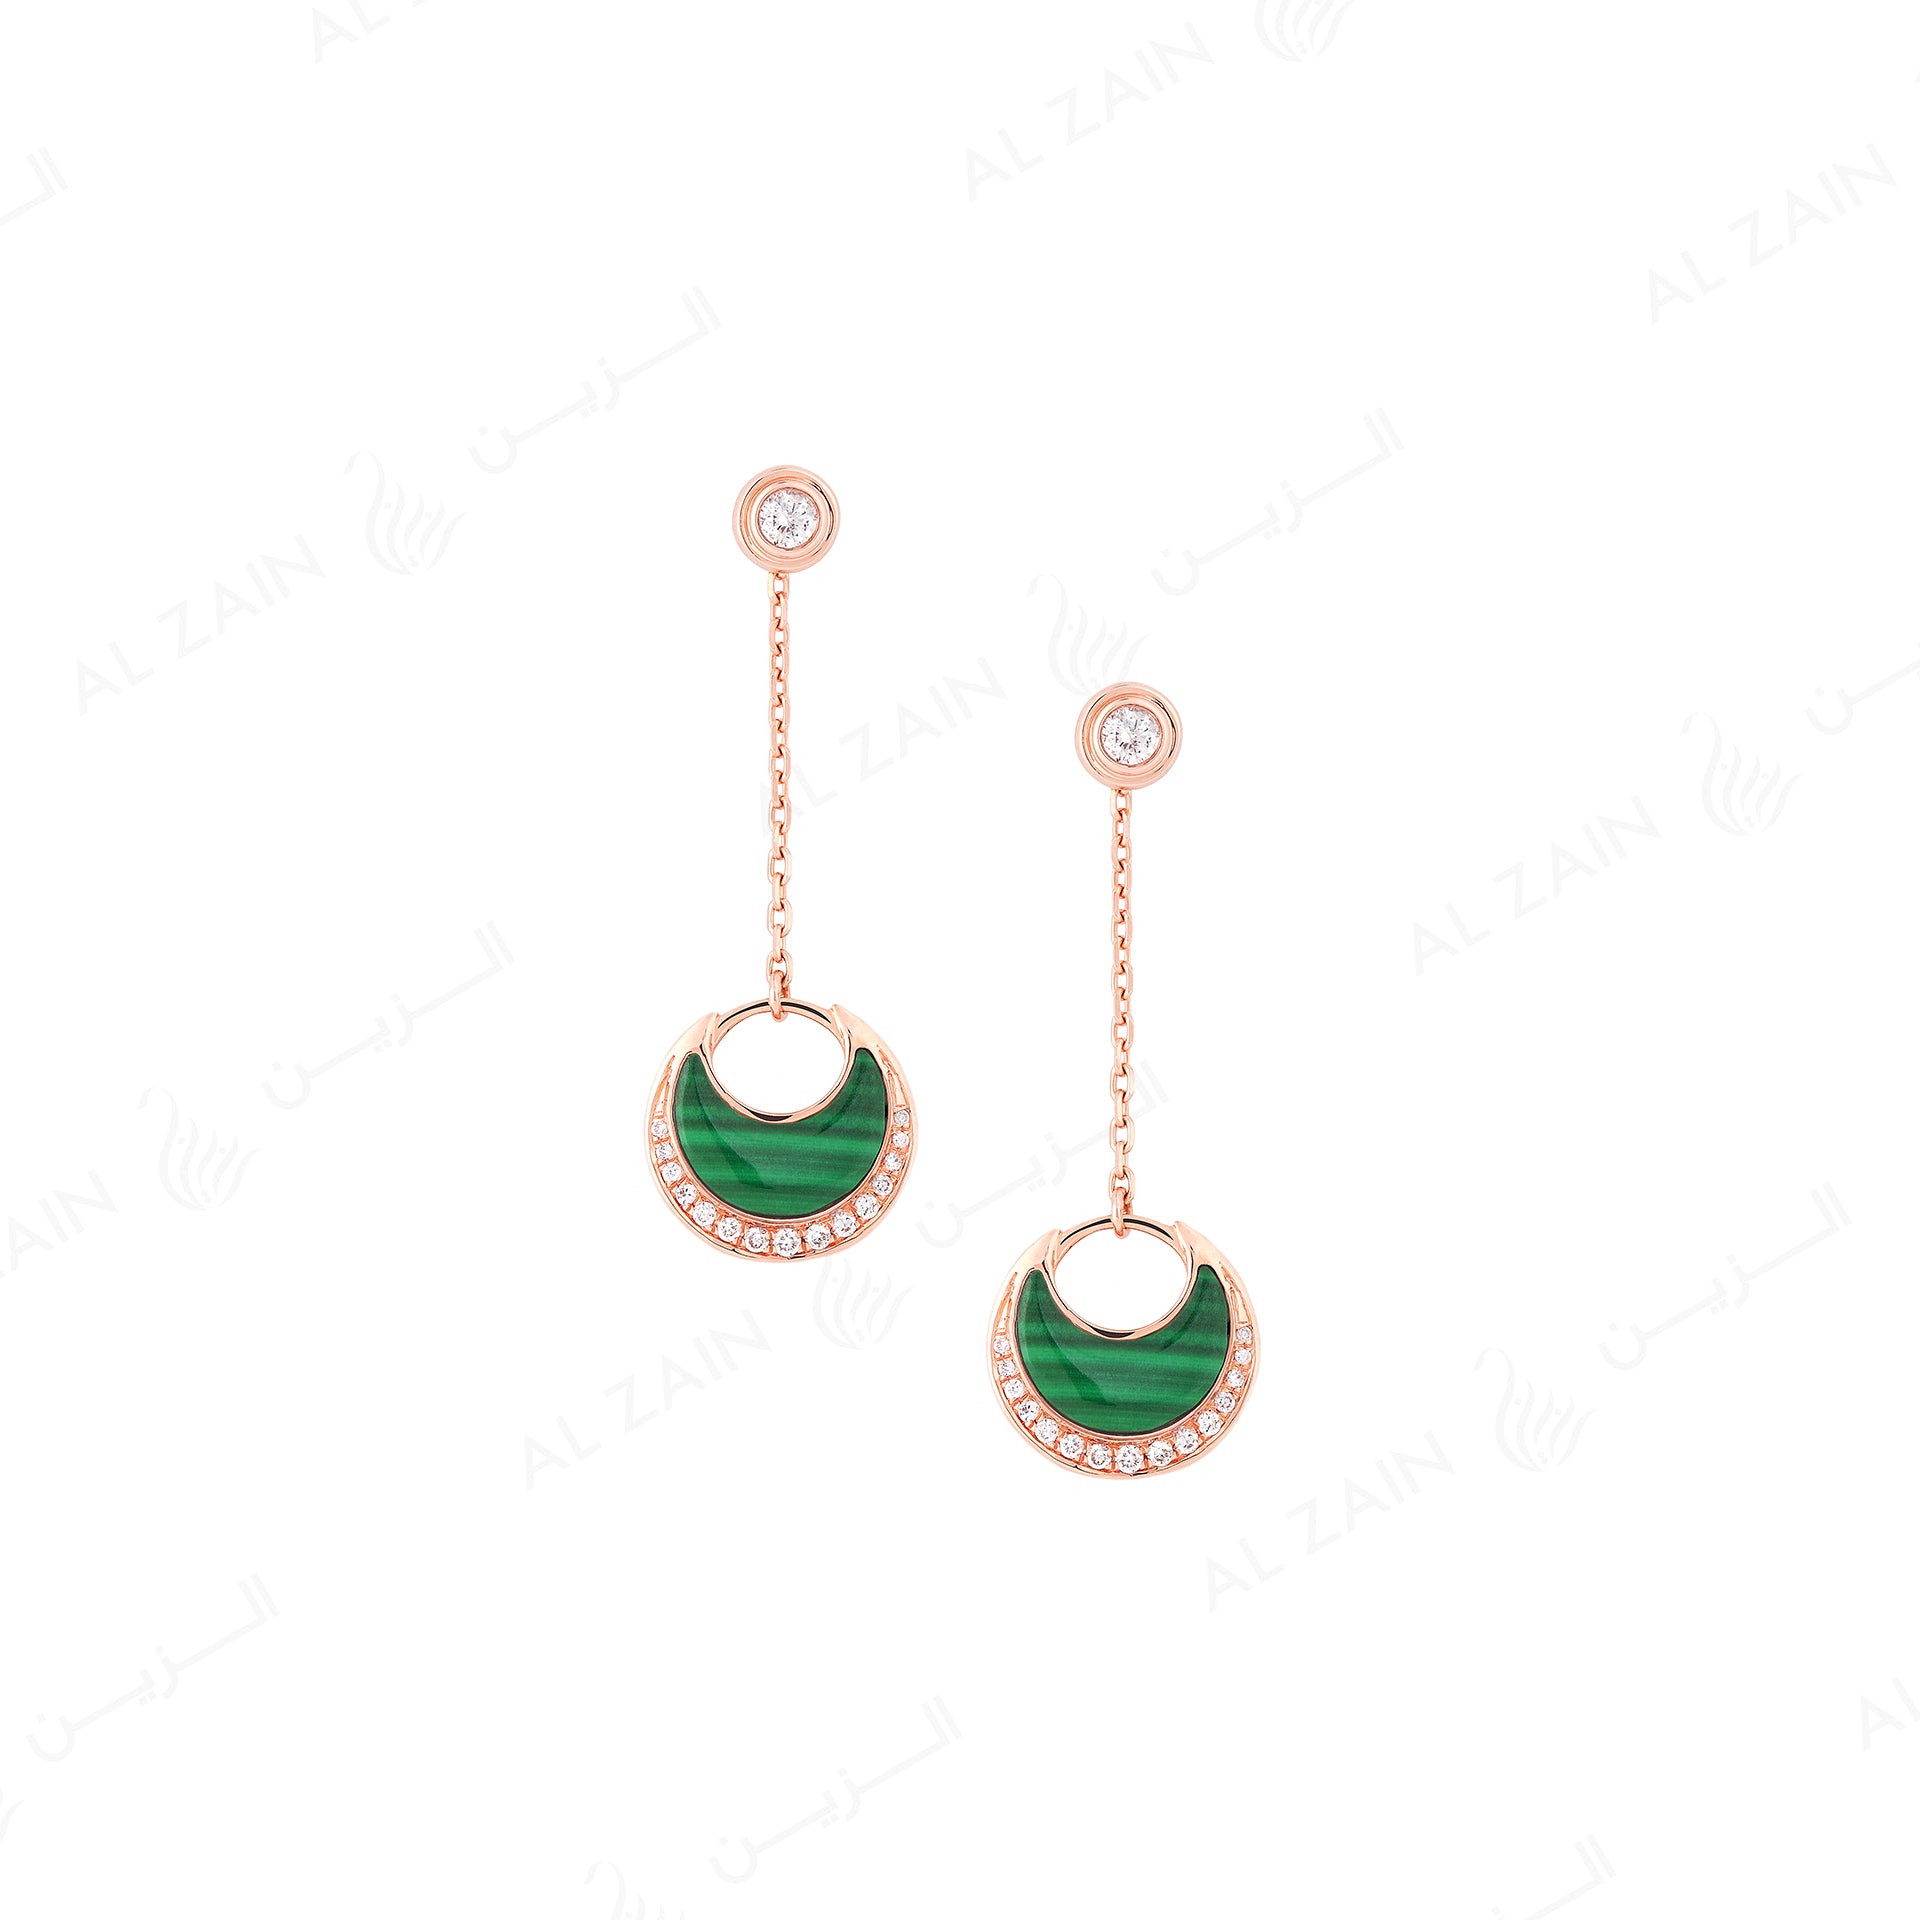 Al Hilal earrings in rose gold with malachite stone and diamonds